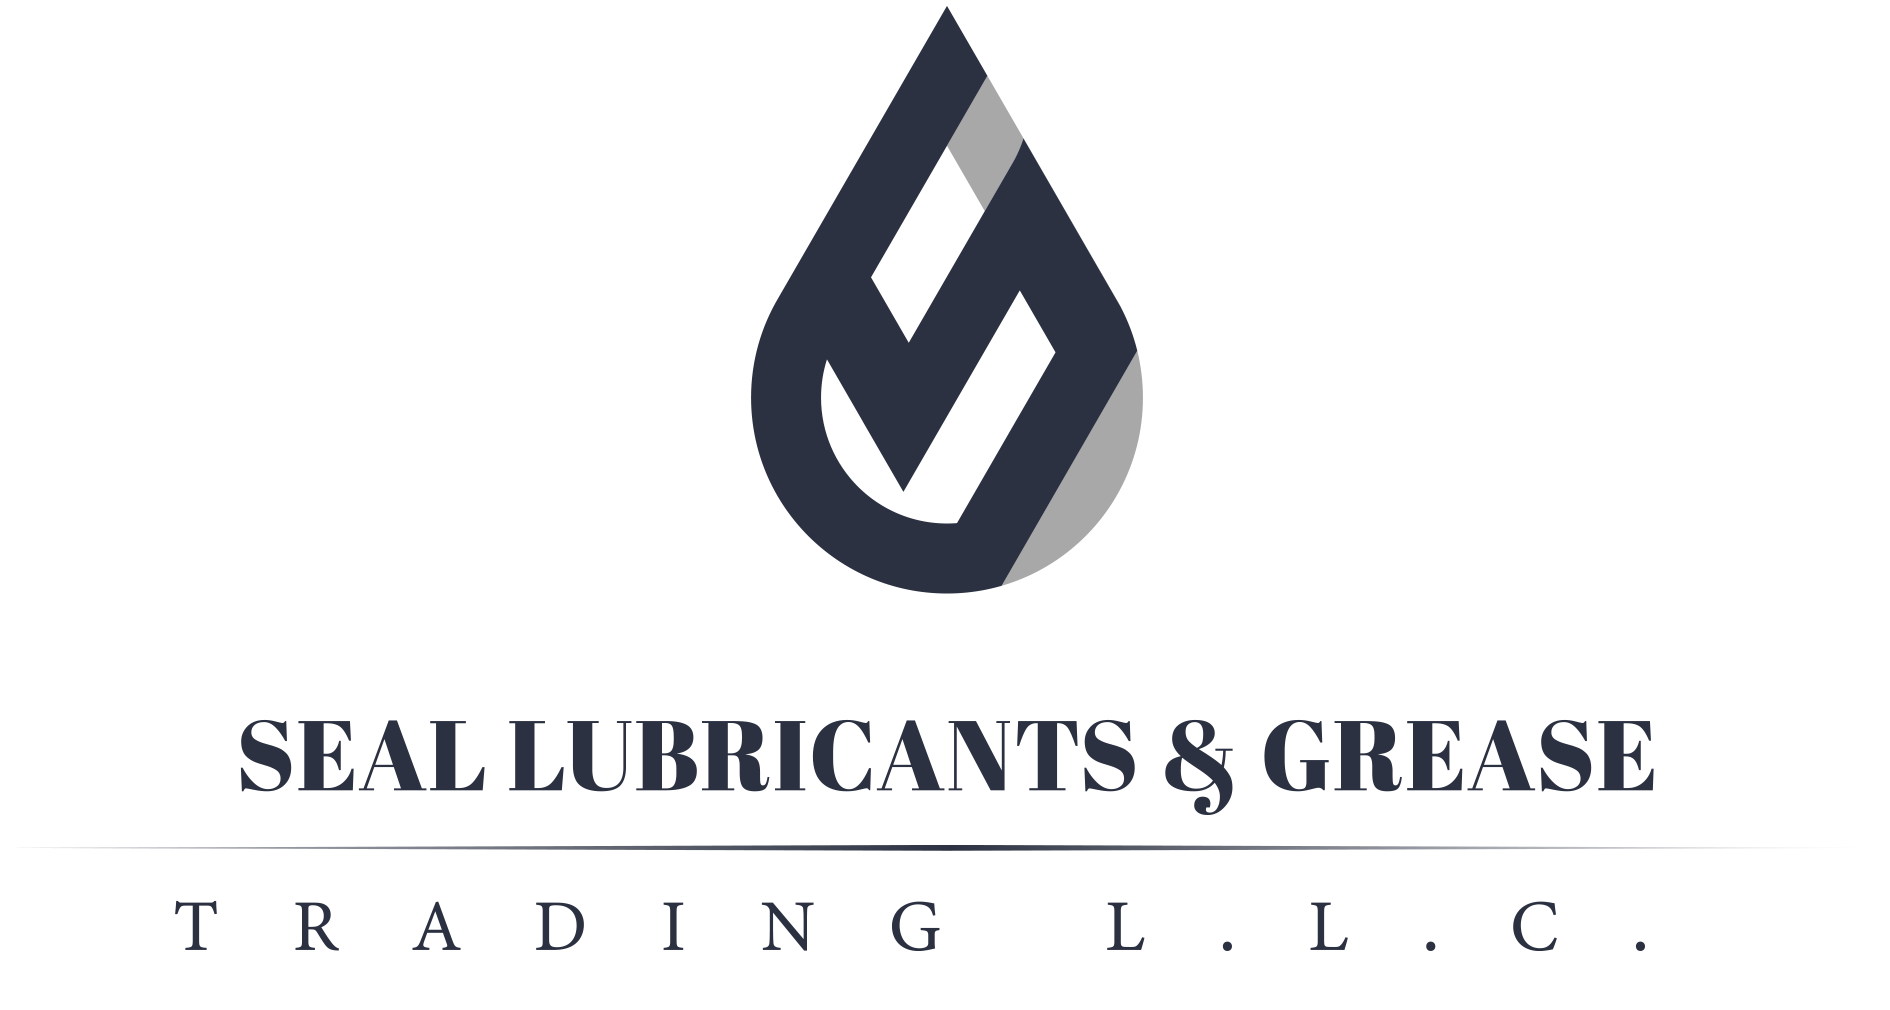 Seal Lubricants & Grease Trading LLC